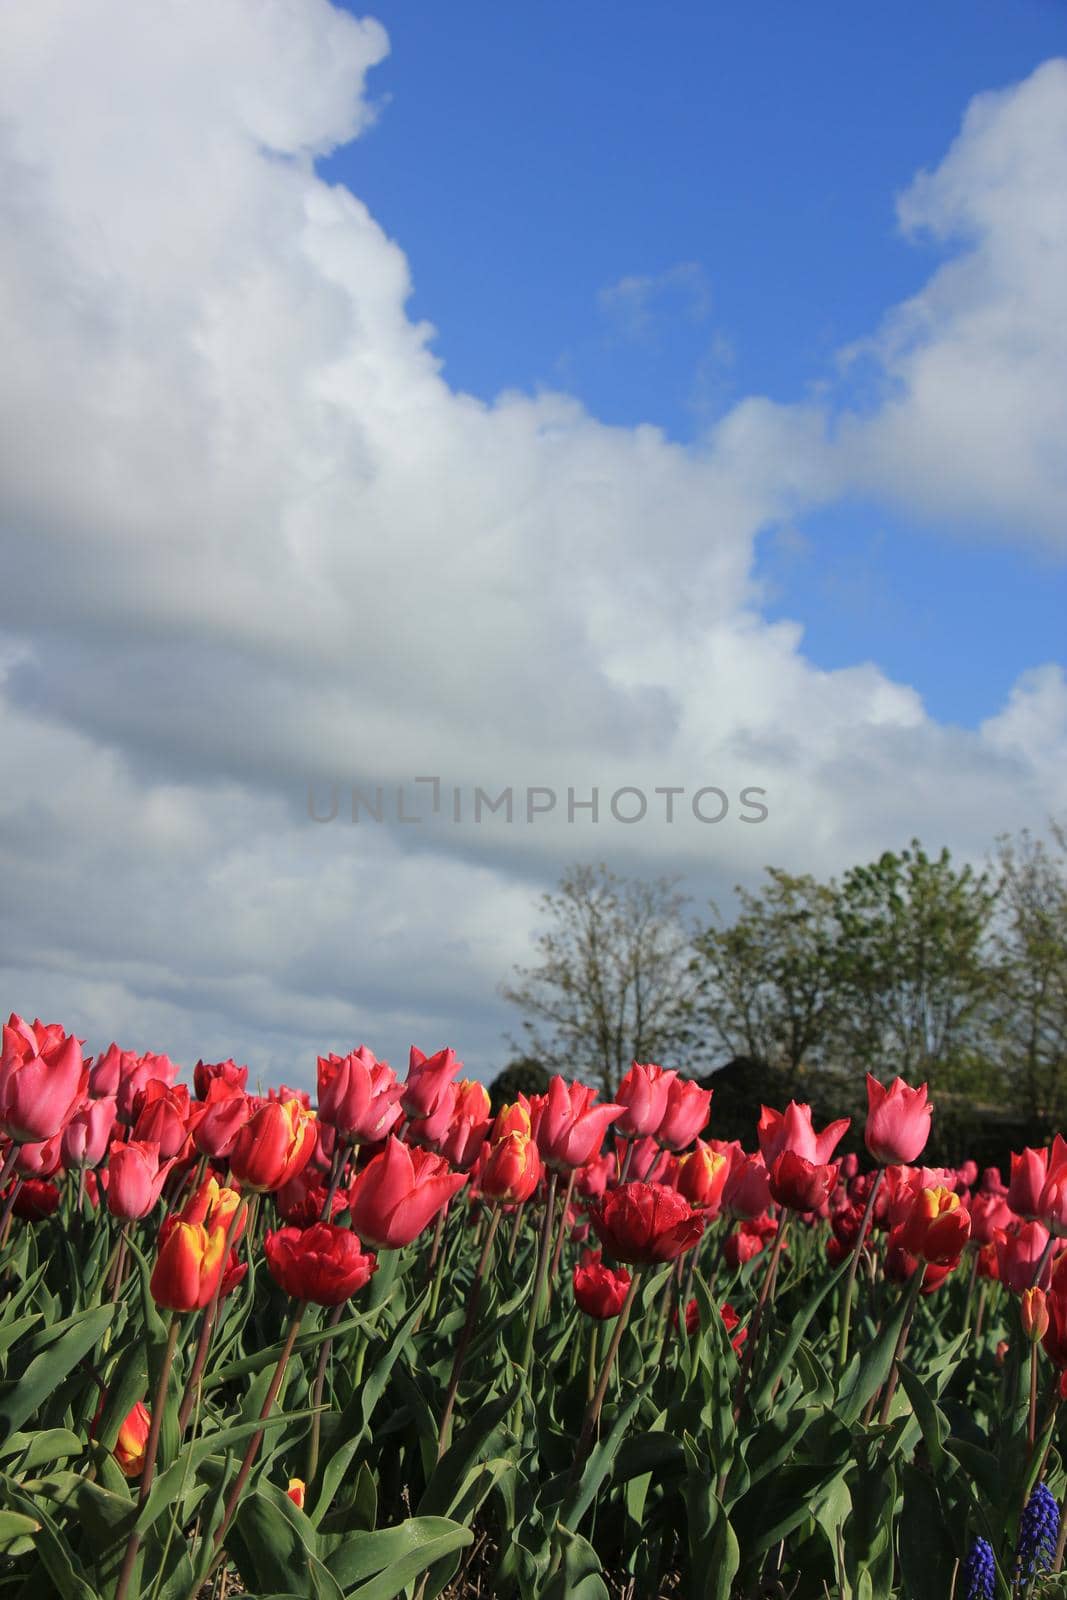 Red and pink tulips in a field, flower bulb industry by studioportosabbia